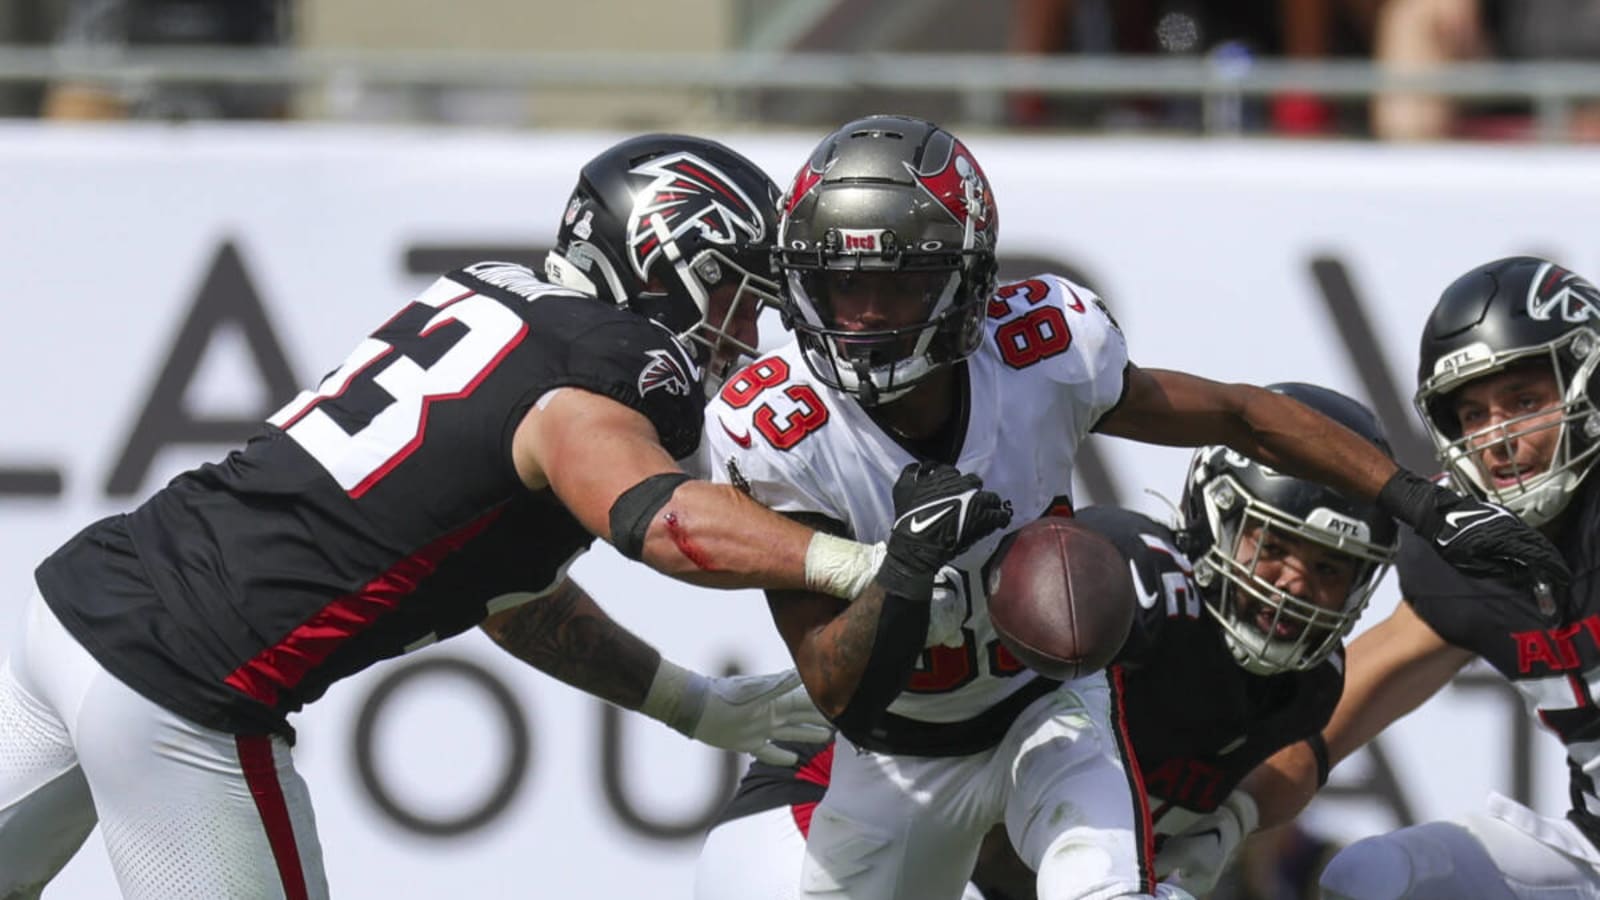 Falcons Sign Ex-USFL LB to Practice Squad After Landman Injury